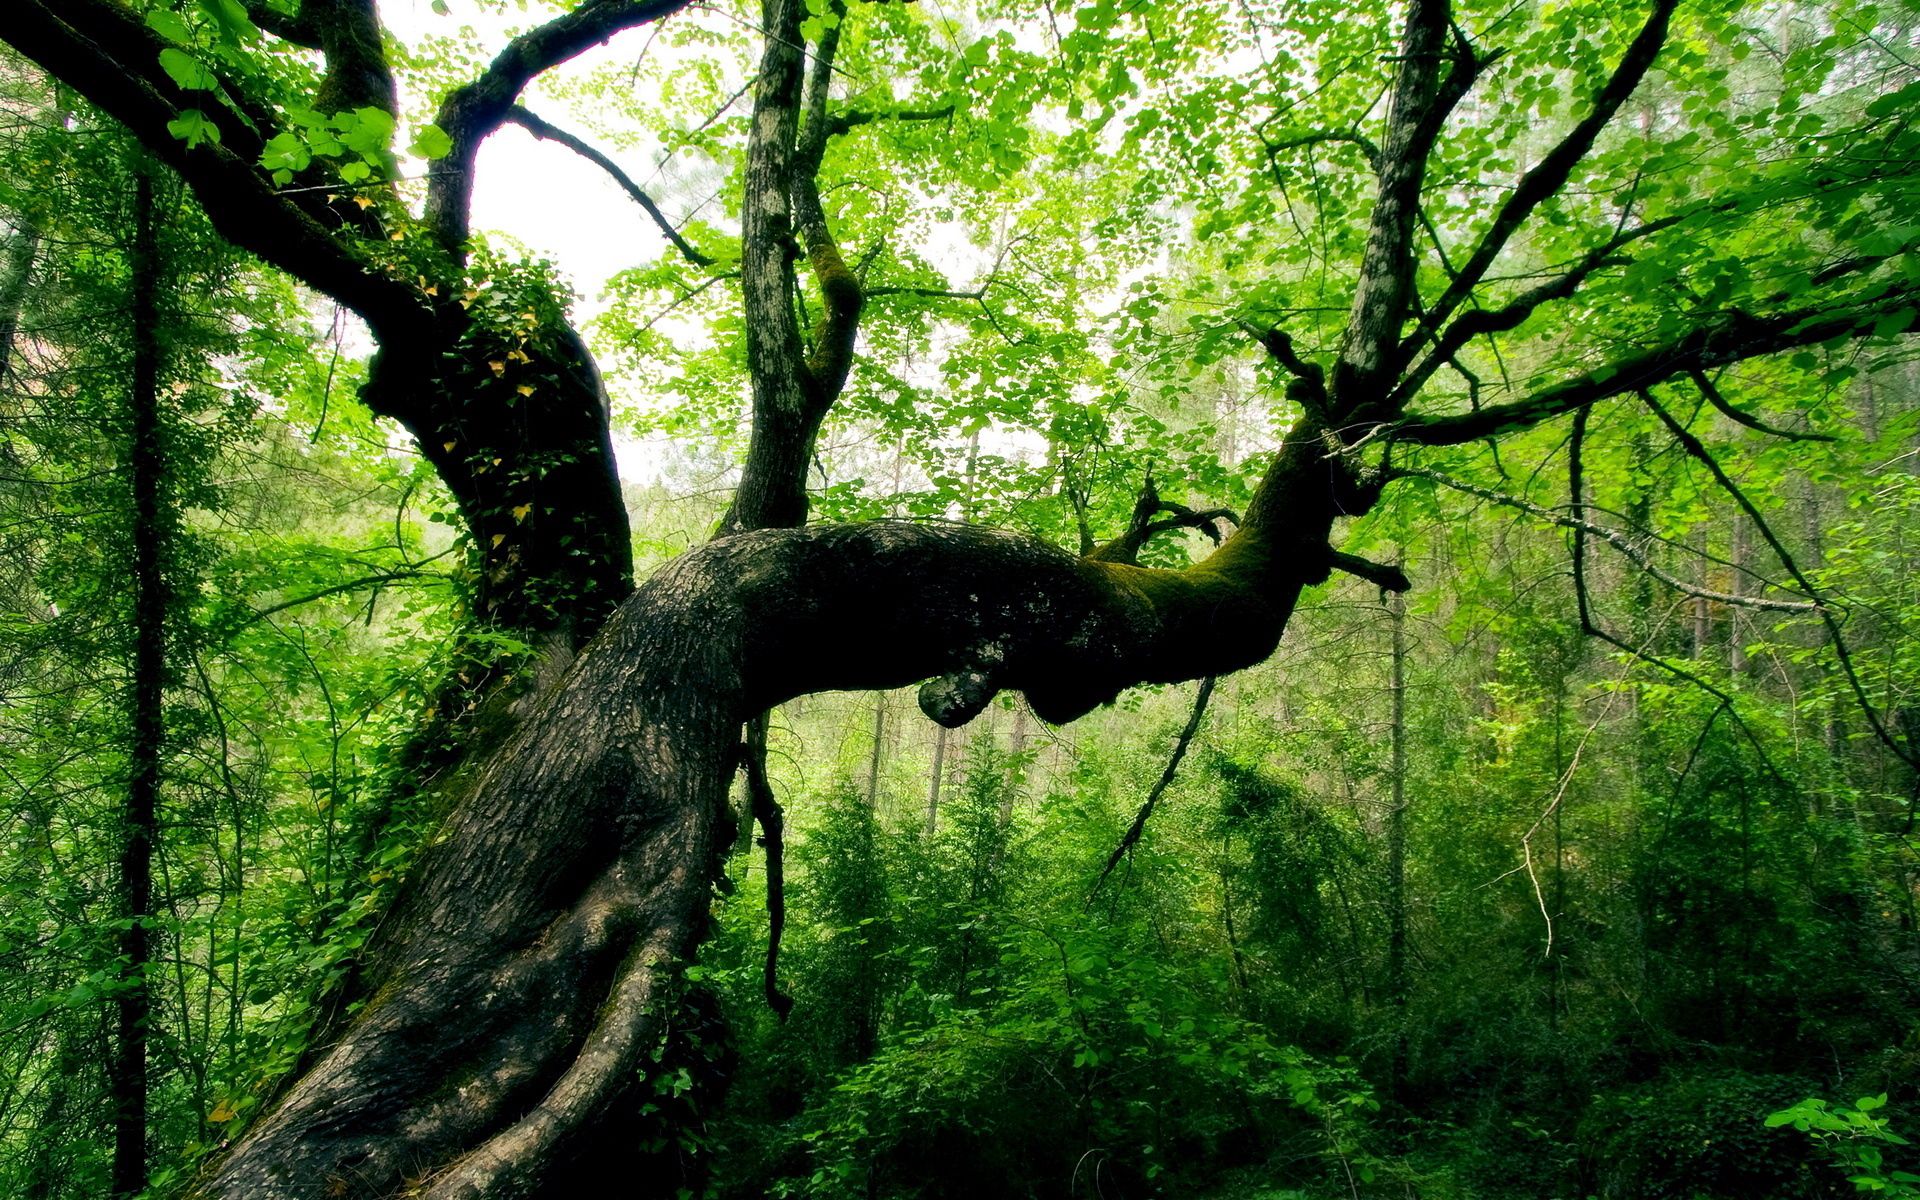 nature, bends, tree, trunk, creepy, wood, leaves, forest, green